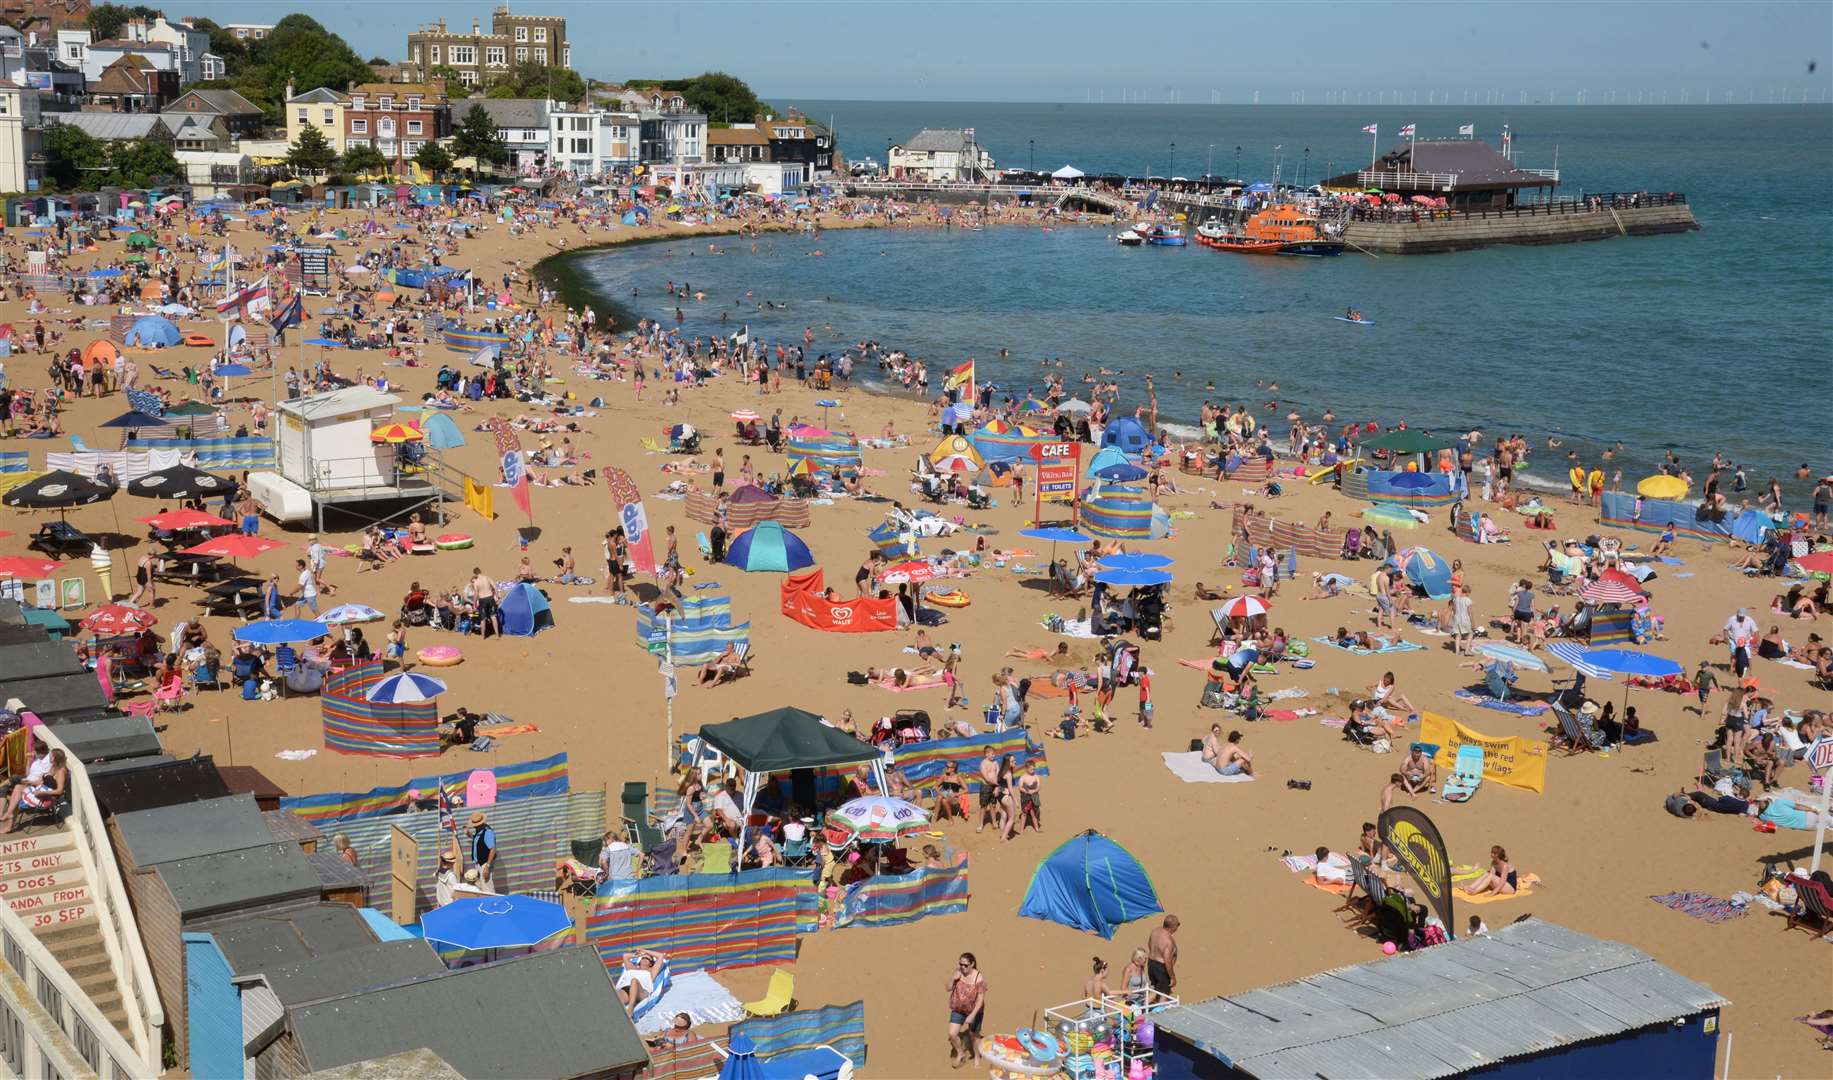 Viking Bay in Broadstairs takes the last place on the top 10 list.